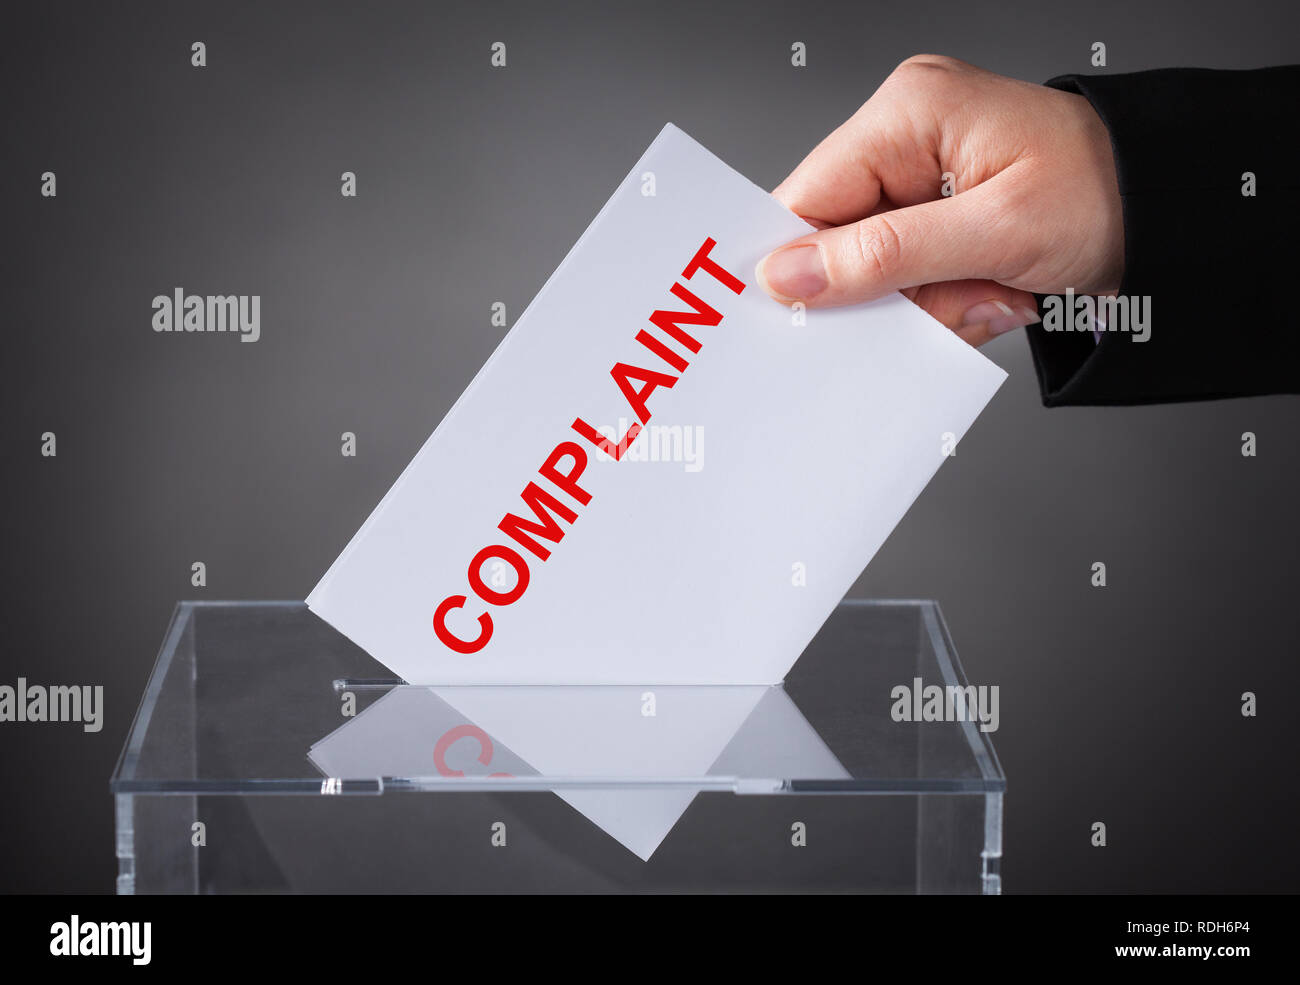 A Person's Hand Inserting Complaint Letter Into Box Slot On Grey Background Stock Photo